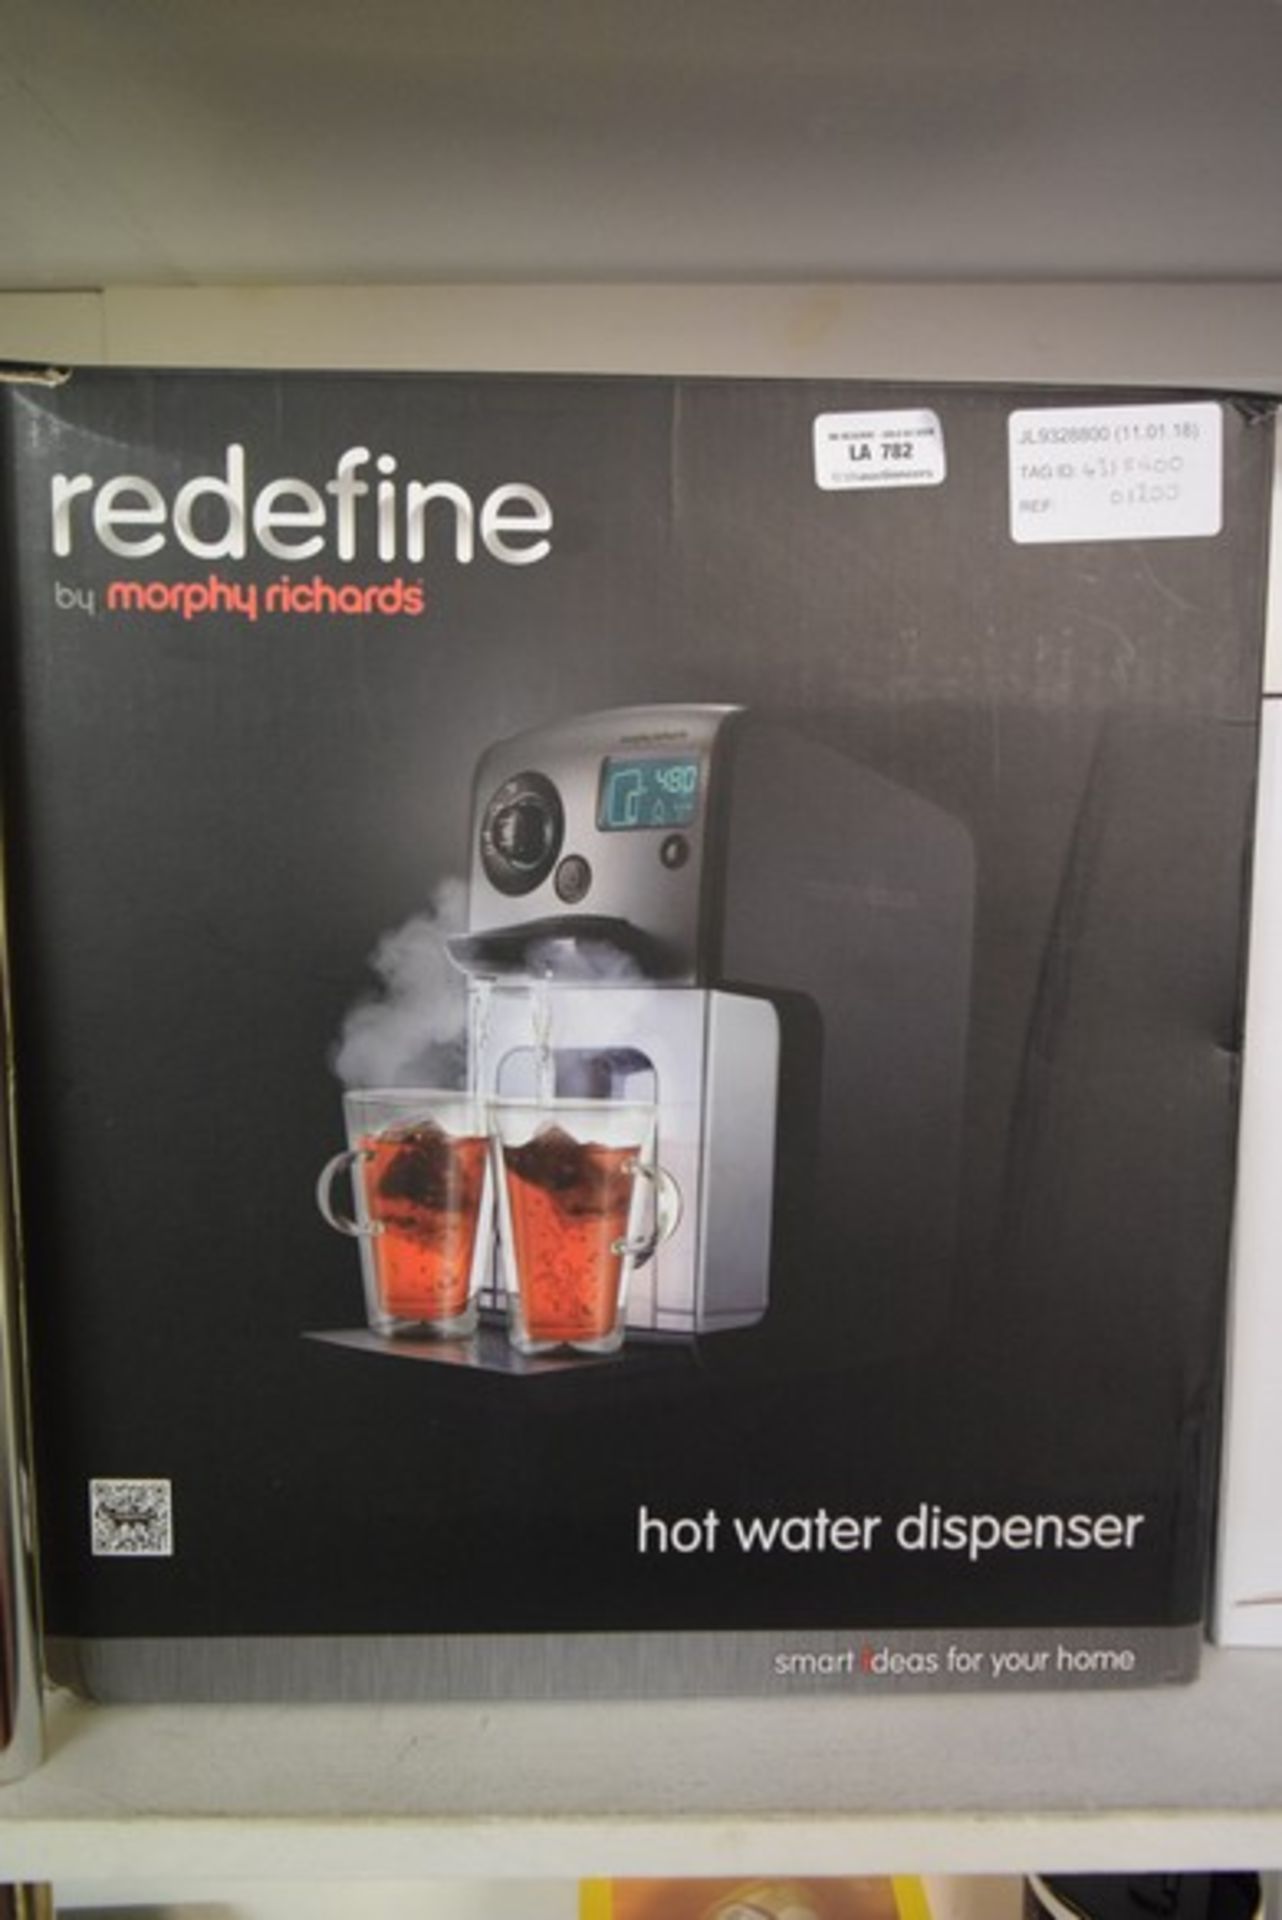 1 x BOXED RE DEFINE BY MORPHY RICHARDS HOT WATER DISPENSER RRP £120 11.01.18 4315900 *PLEASE NOTE